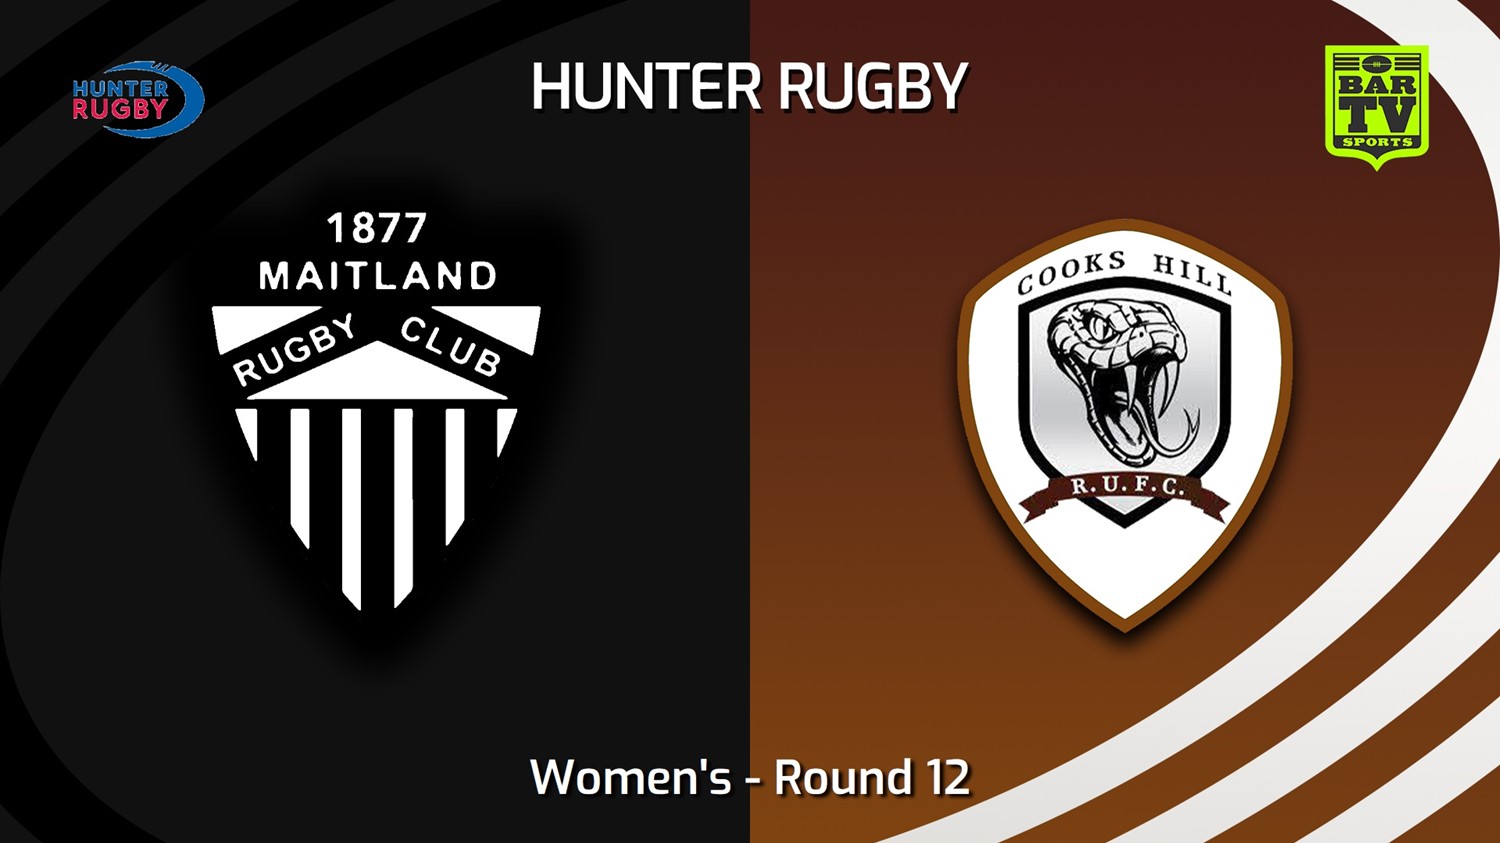 240706-video-Hunter Rugby Round 12 - Women's - Maitland v Cooks Hill Brownies Slate Image